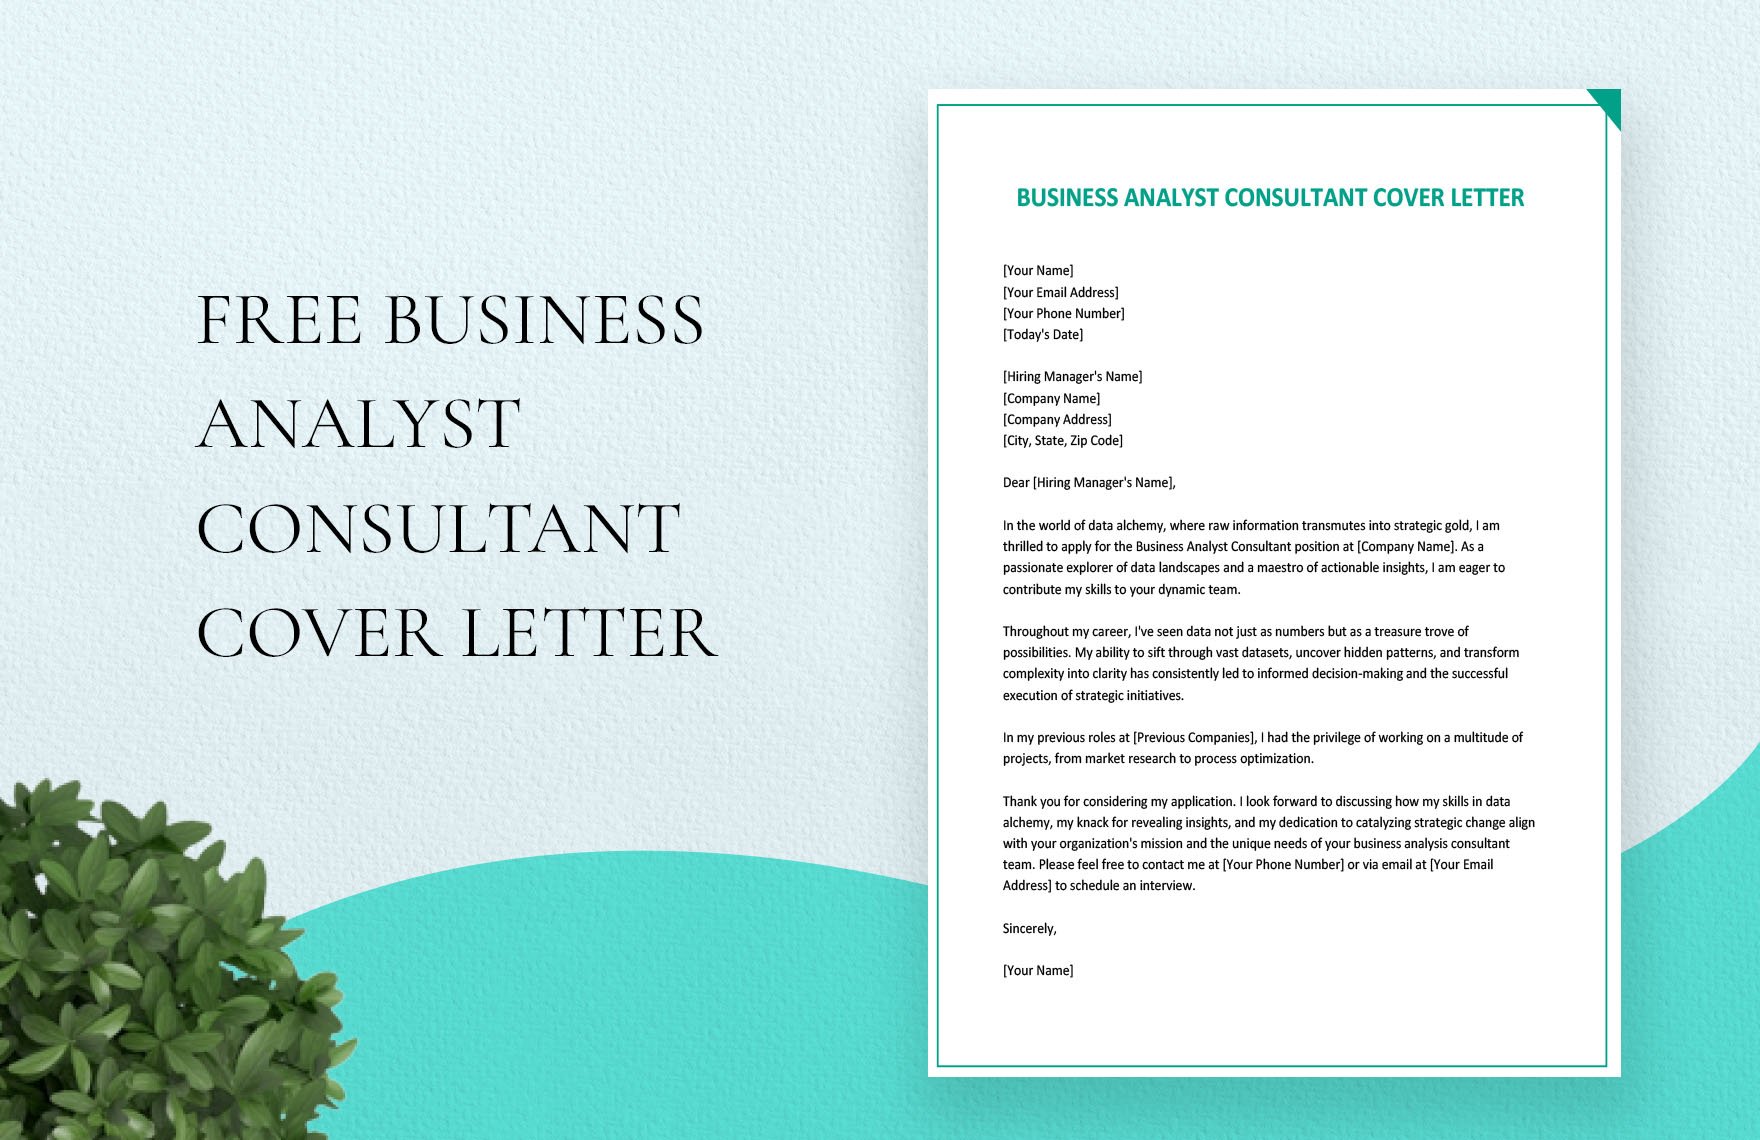 Business Analyst Consultant Cover Letter in Word, Google Docs